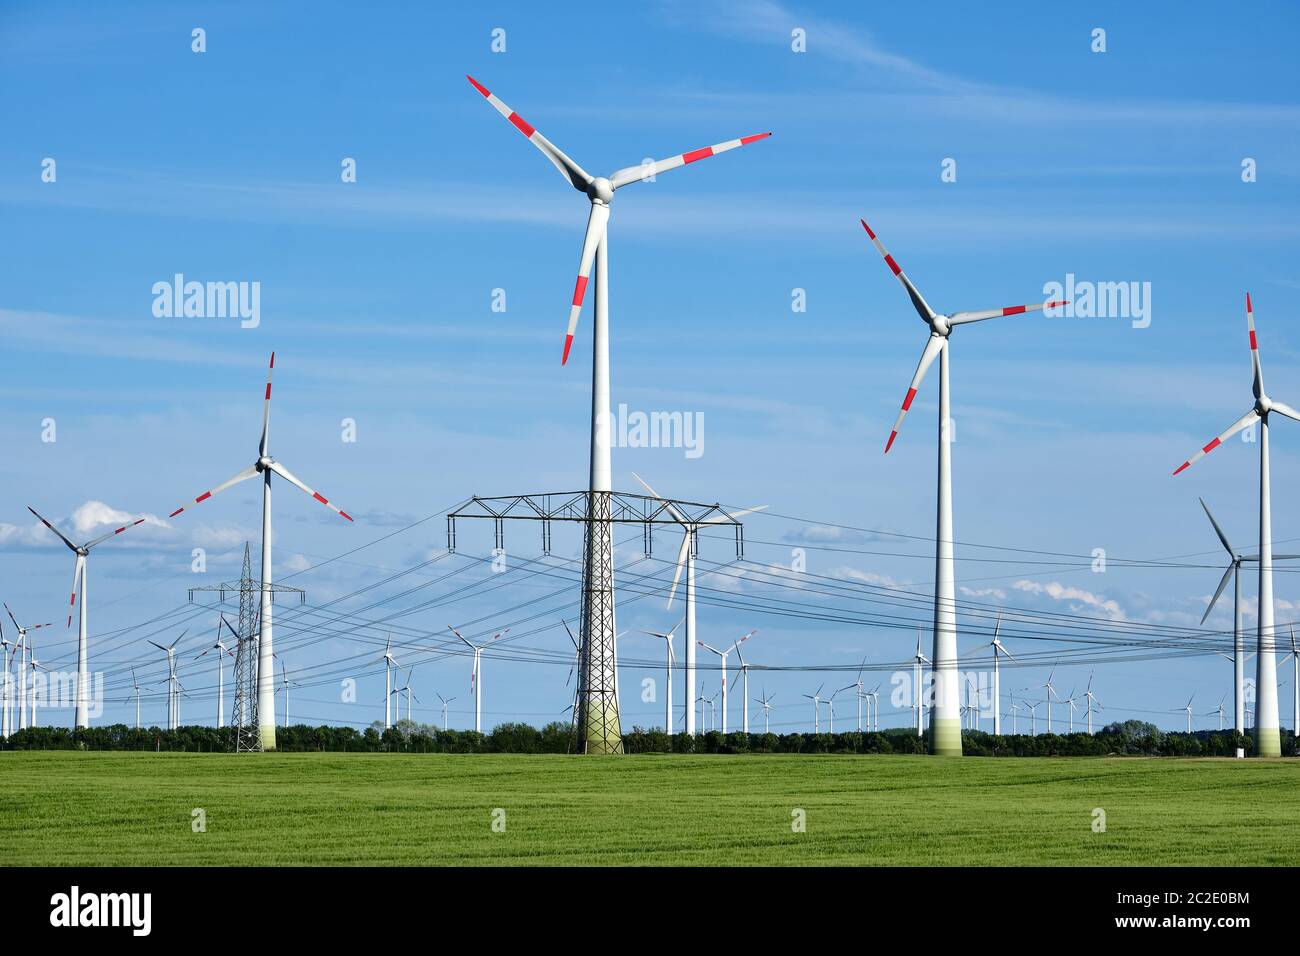 Overhead power lines and wind engines seen in Germany Stock Photo